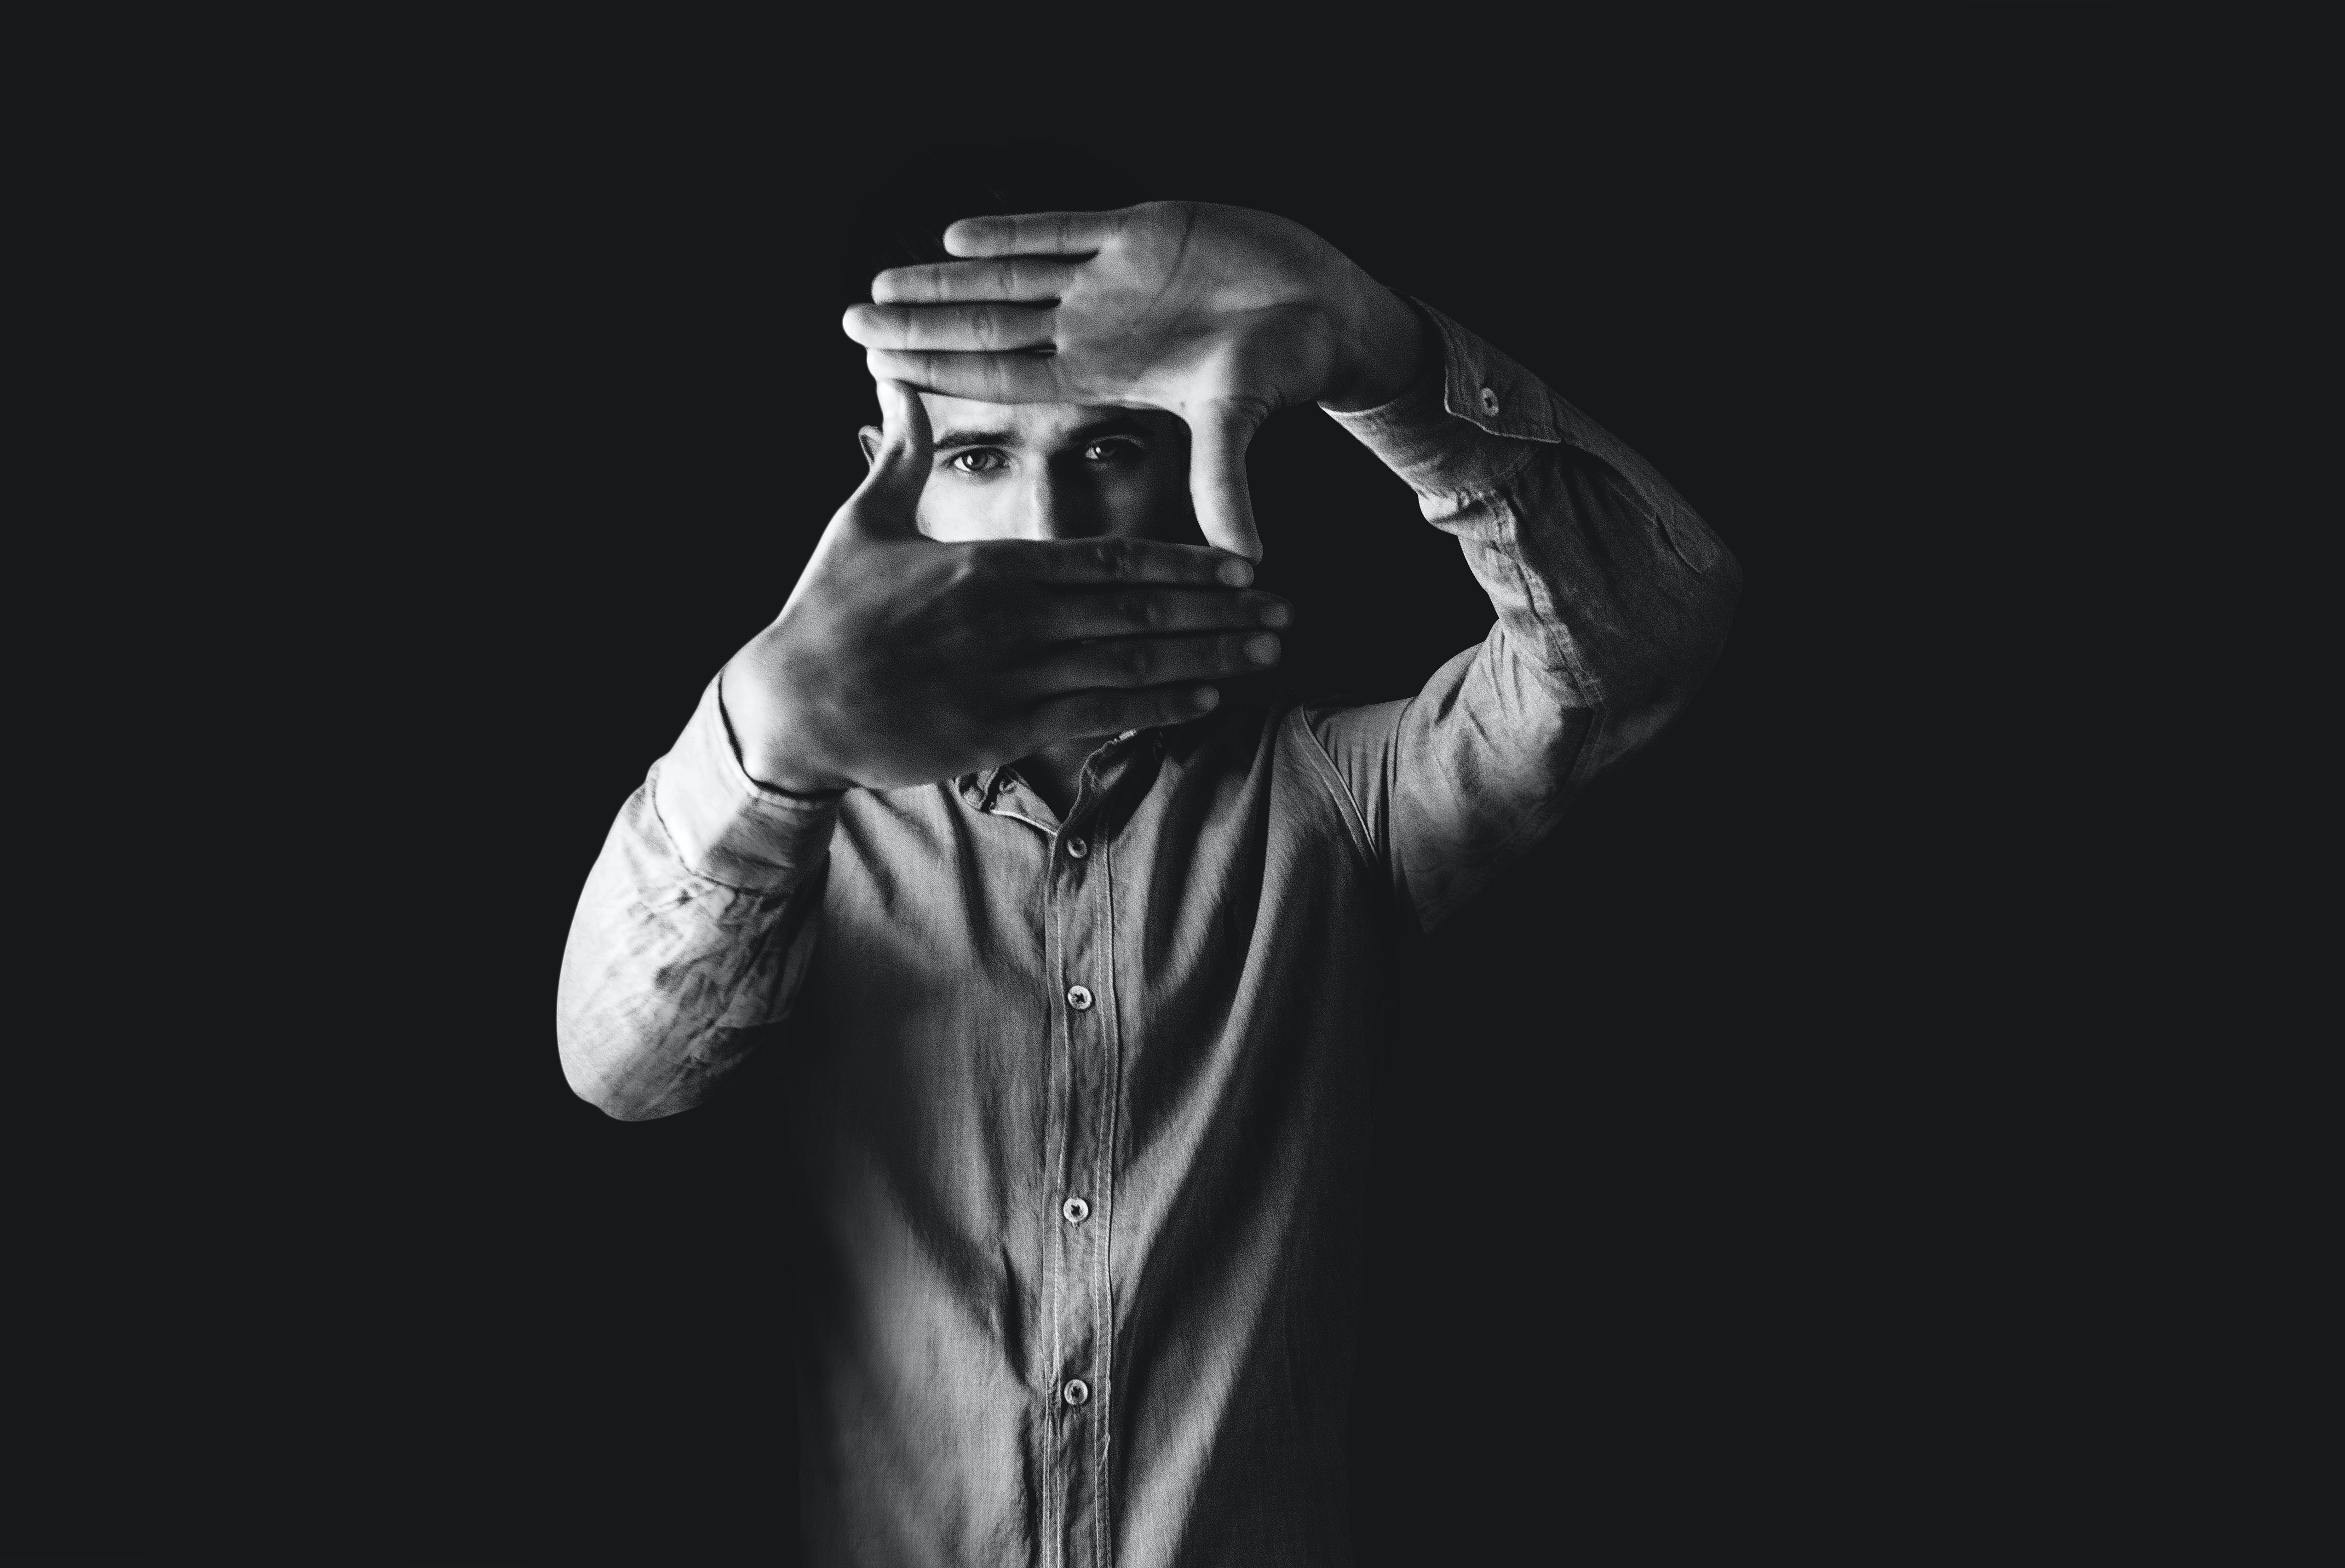 Black and white photo of man looking into the camera through a square he made with his hands